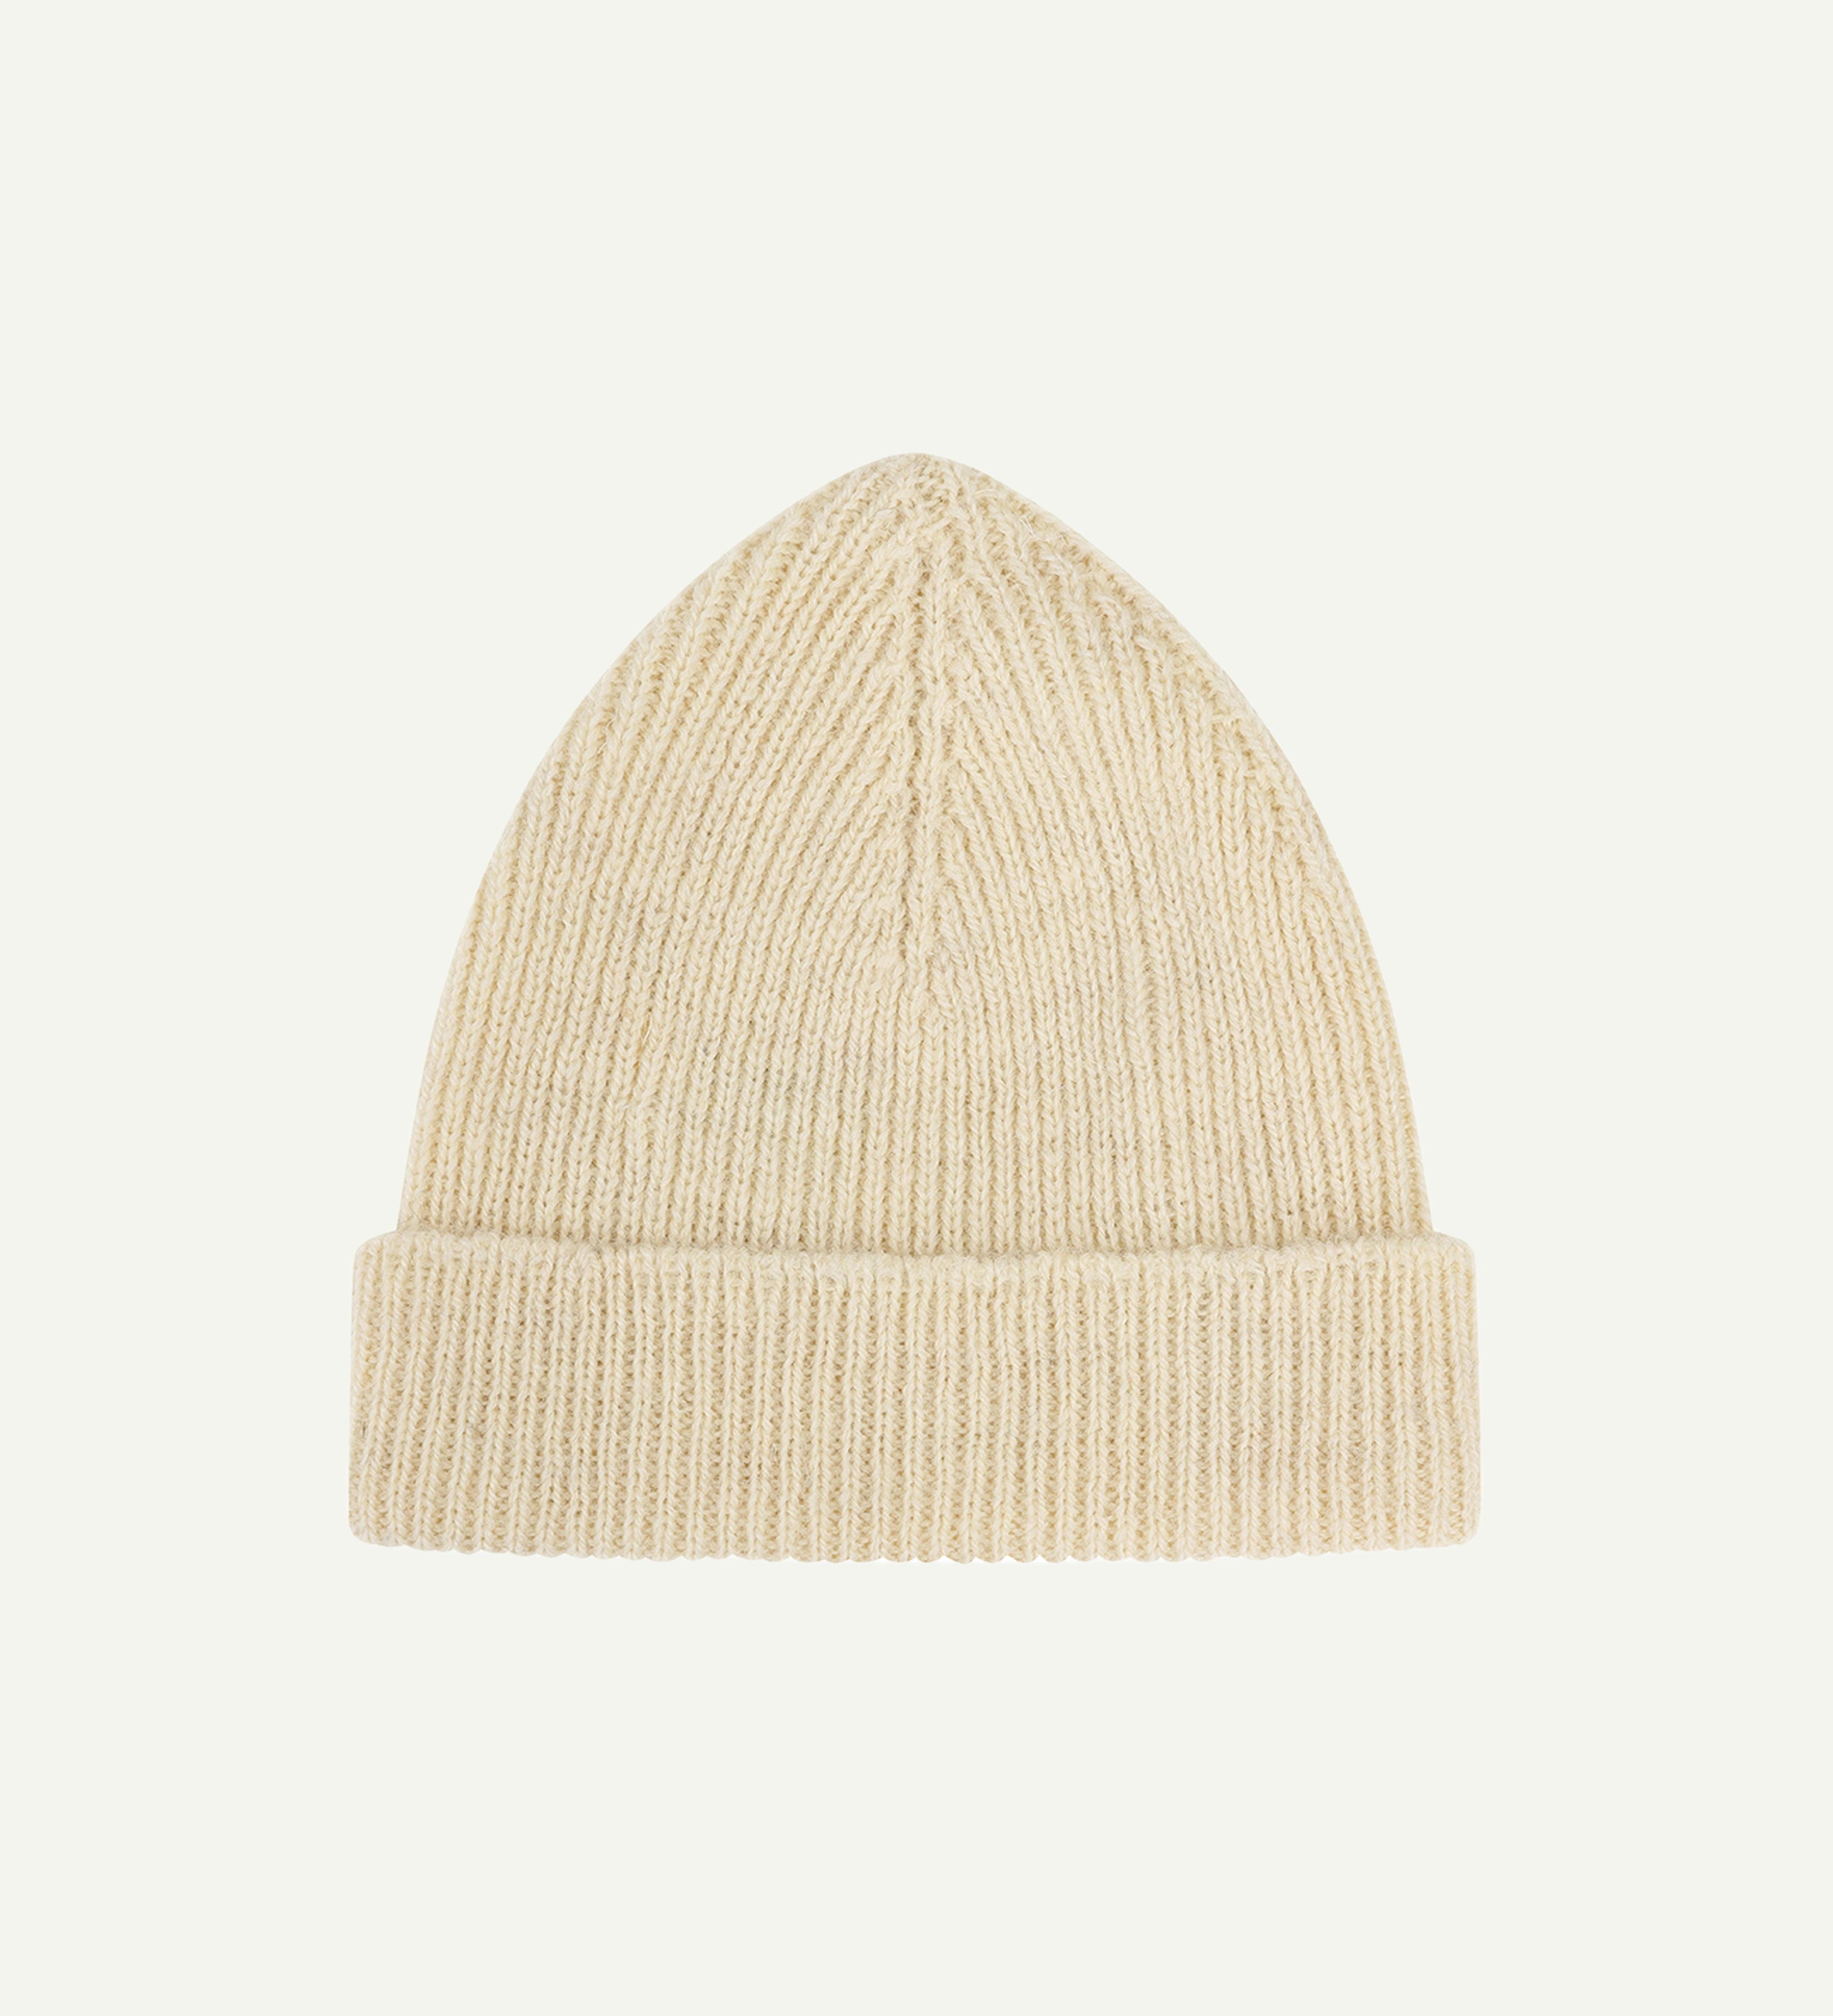 Flat view of Uskees 4005 undyed 'light oat' pale beige coloured wool hat, with clear view of adjustable cuff.